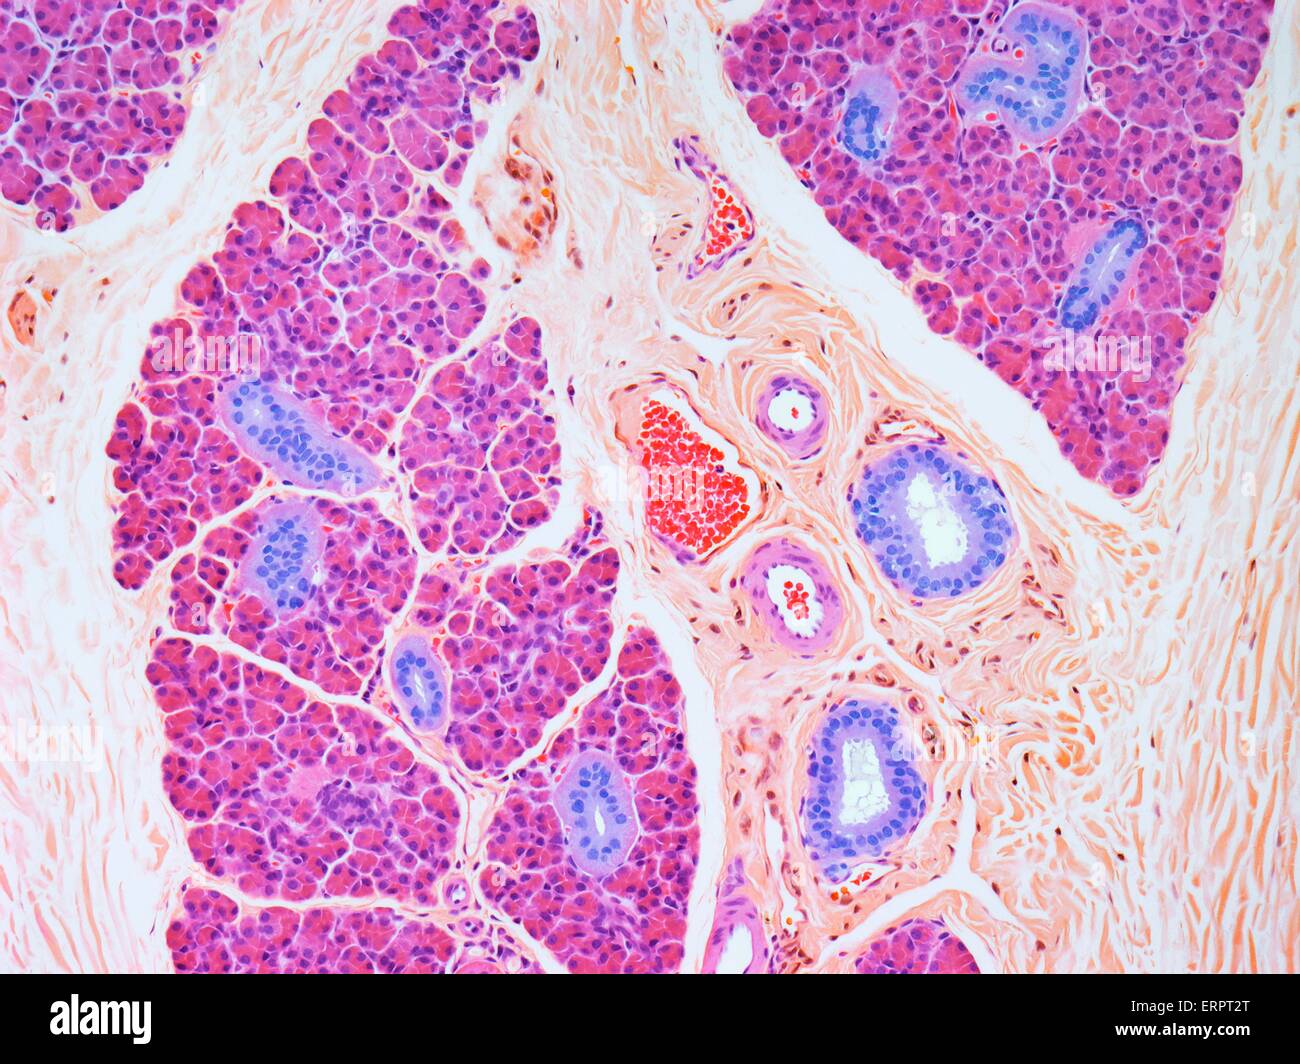 Salivary gland. Coloured light micrograph of a section through a parotid salivary gland. The glands are divided into numerous lobules by stretches of connective tissue (orange). The pink secretory cells produce components of saliva to lubricate the mouth Stock Photo